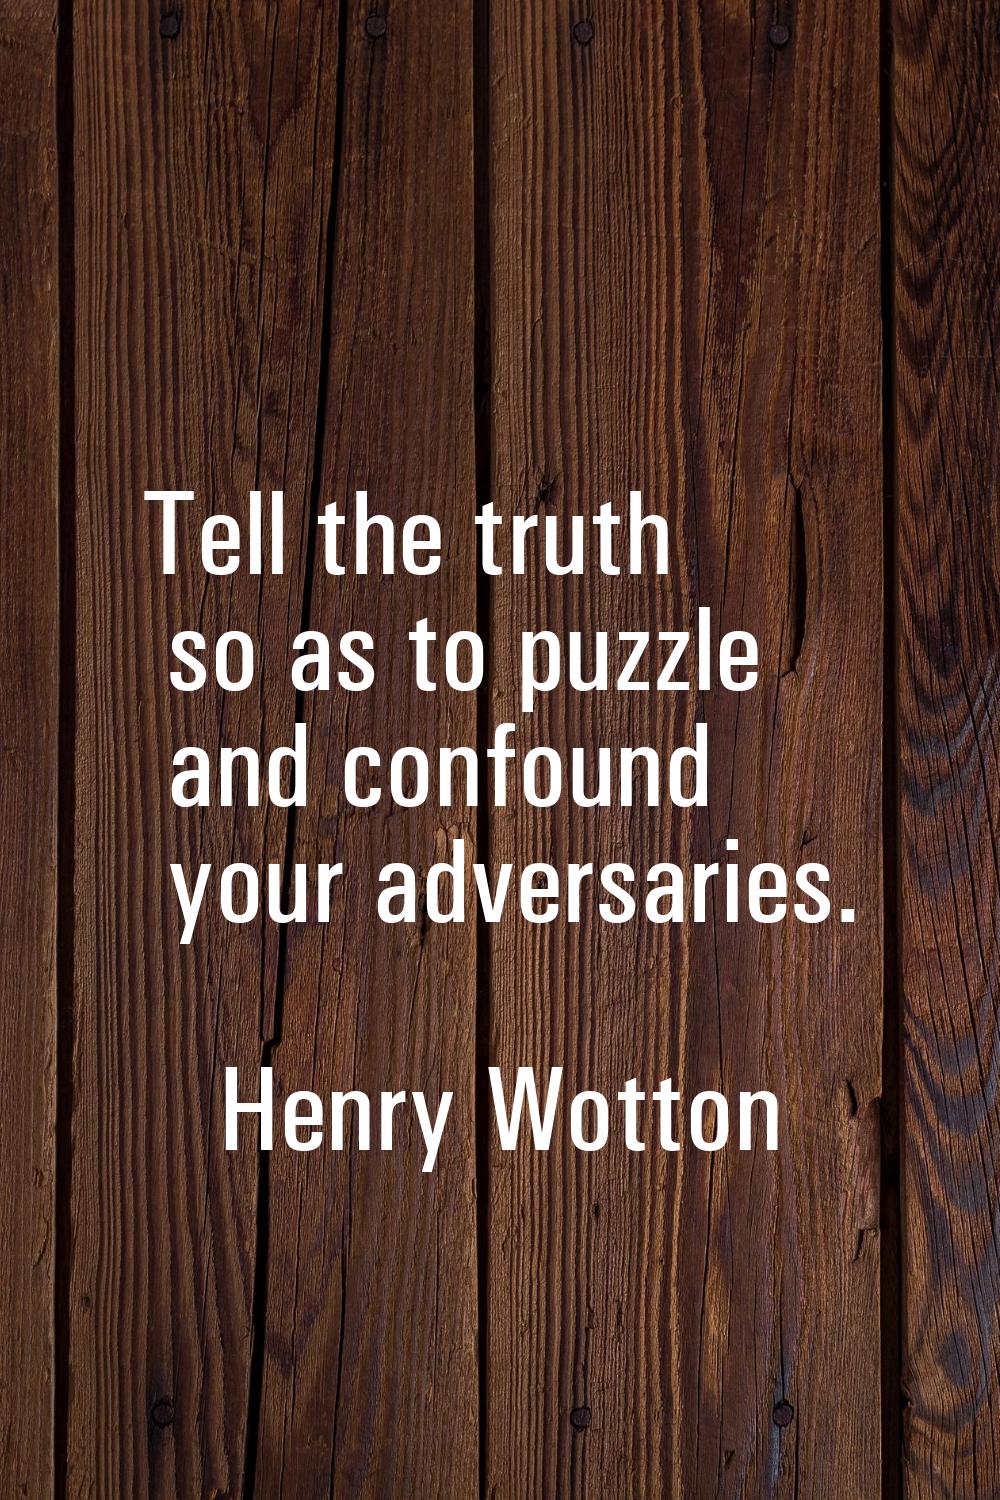 Tell the truth so as to puzzle and confound your adversaries.